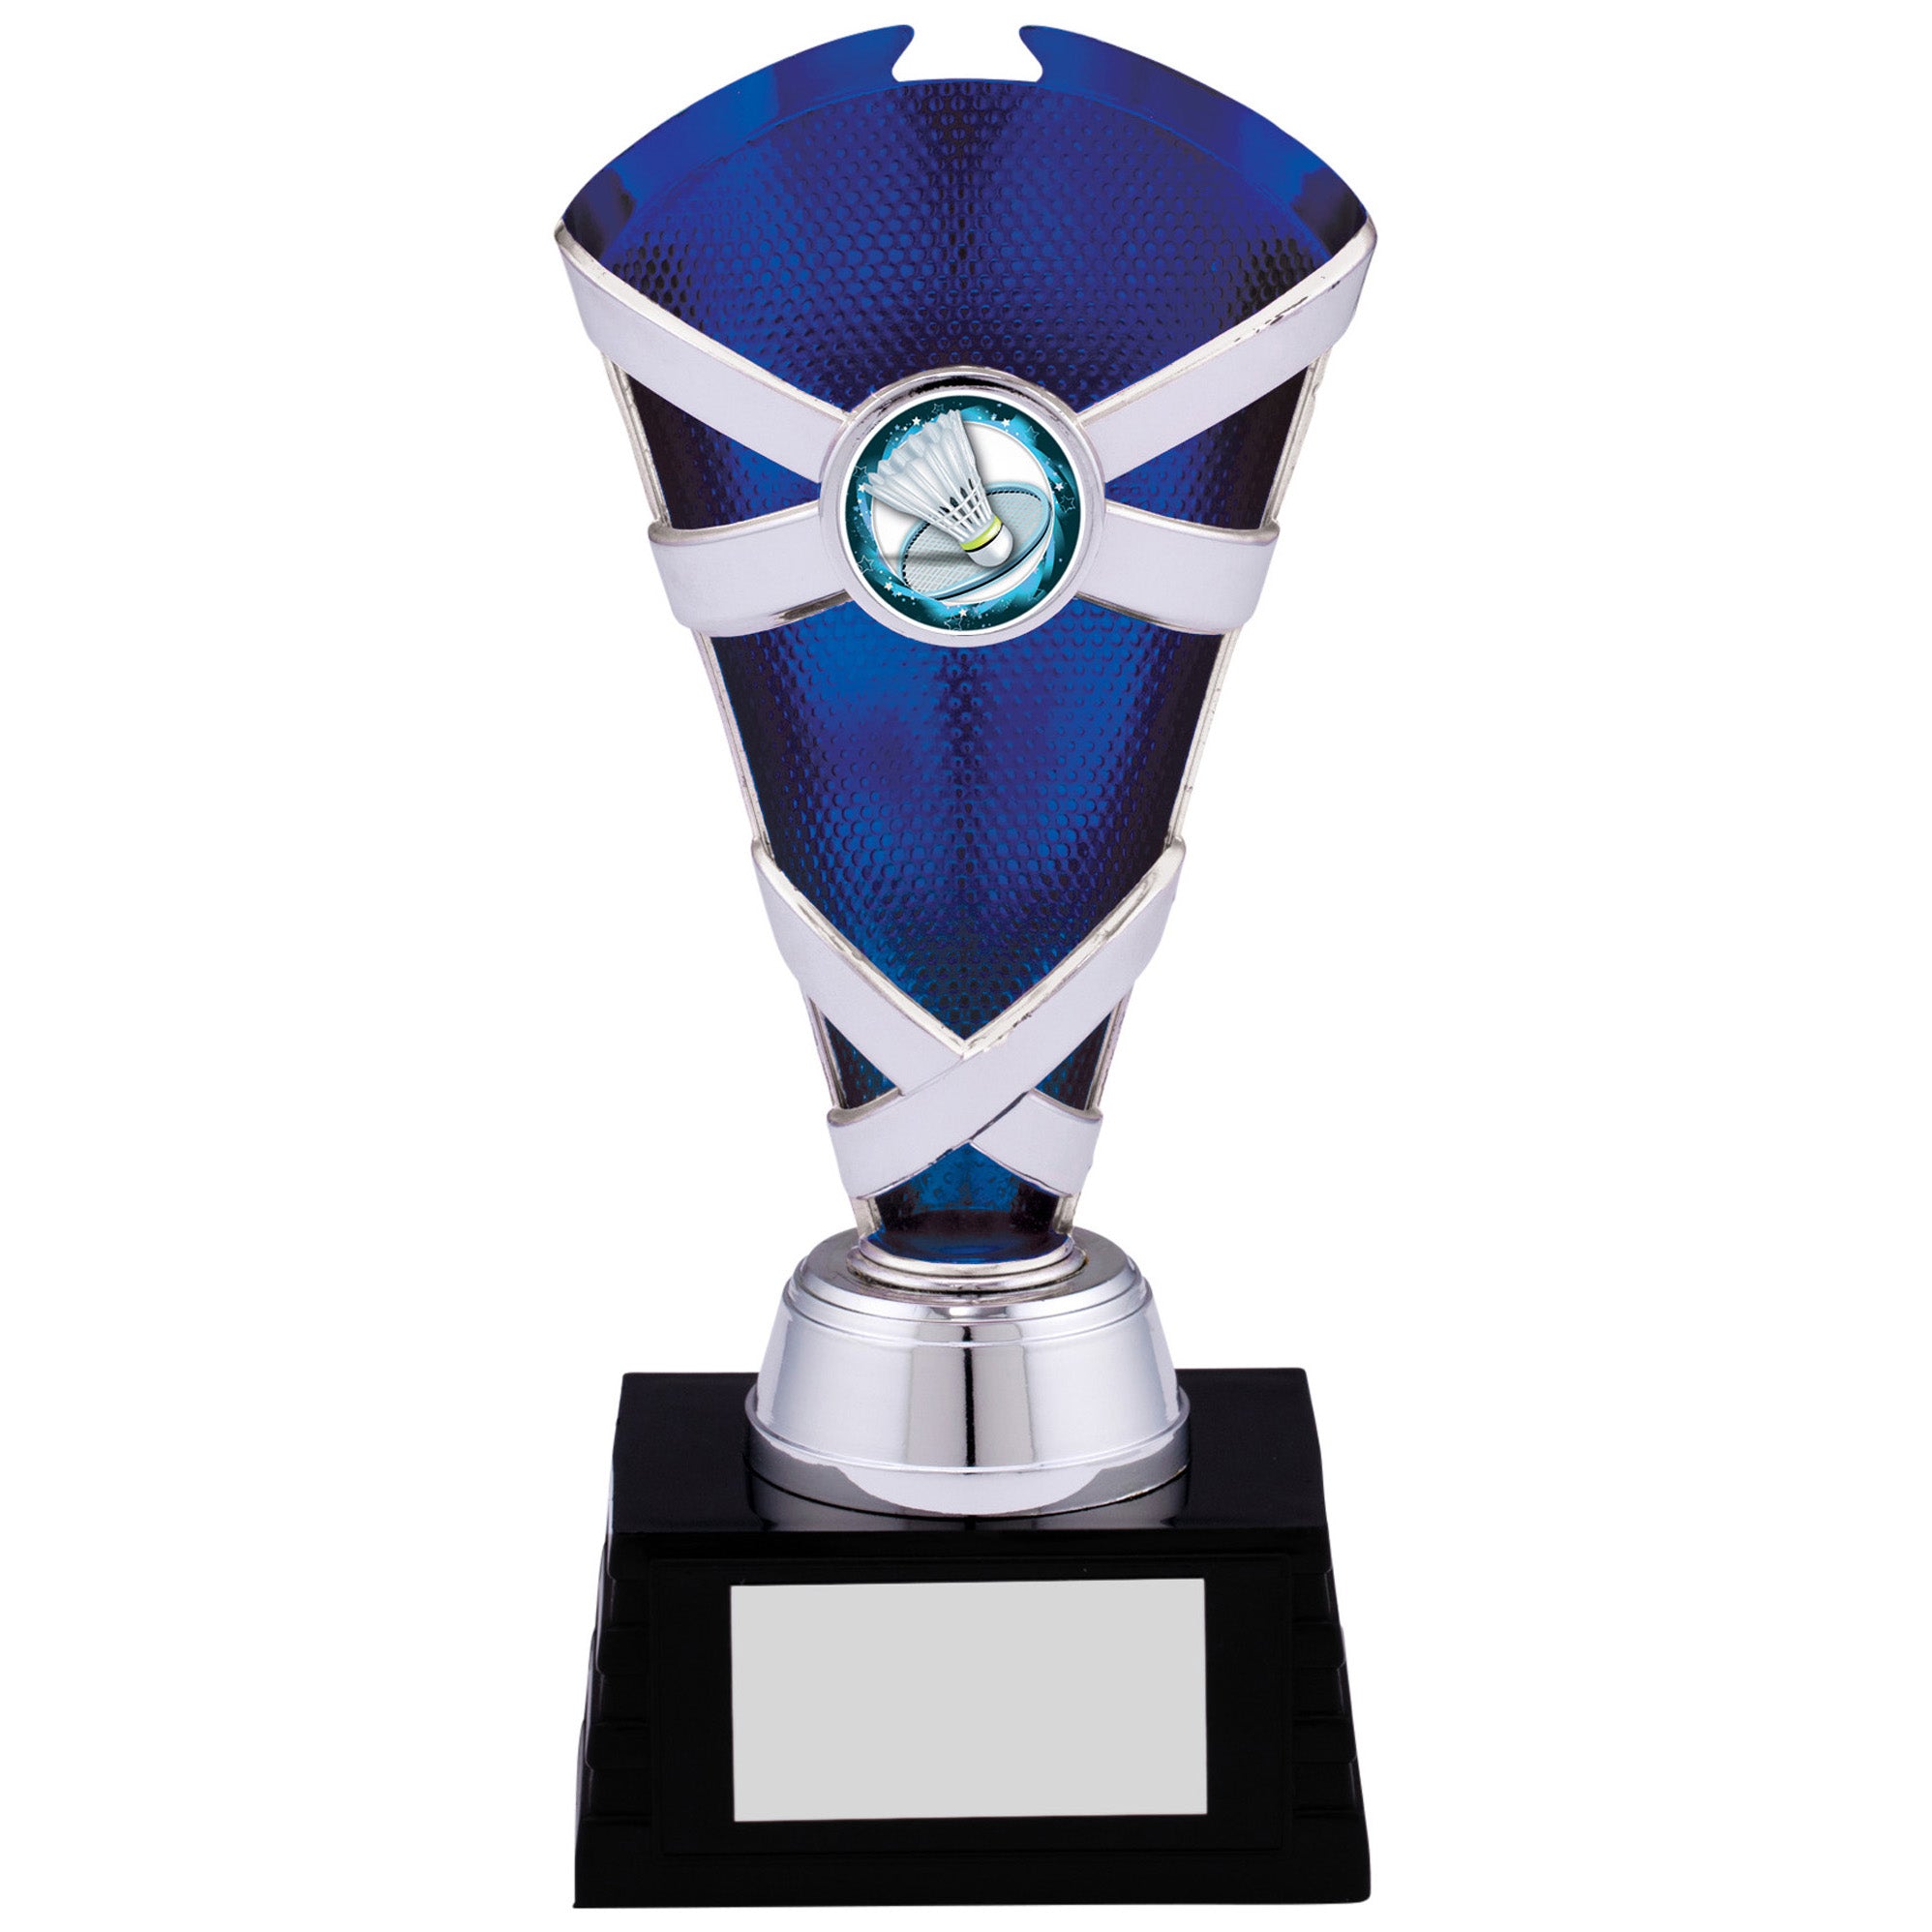 Criss Cross Silver and Blue Plastic Trophy Cup